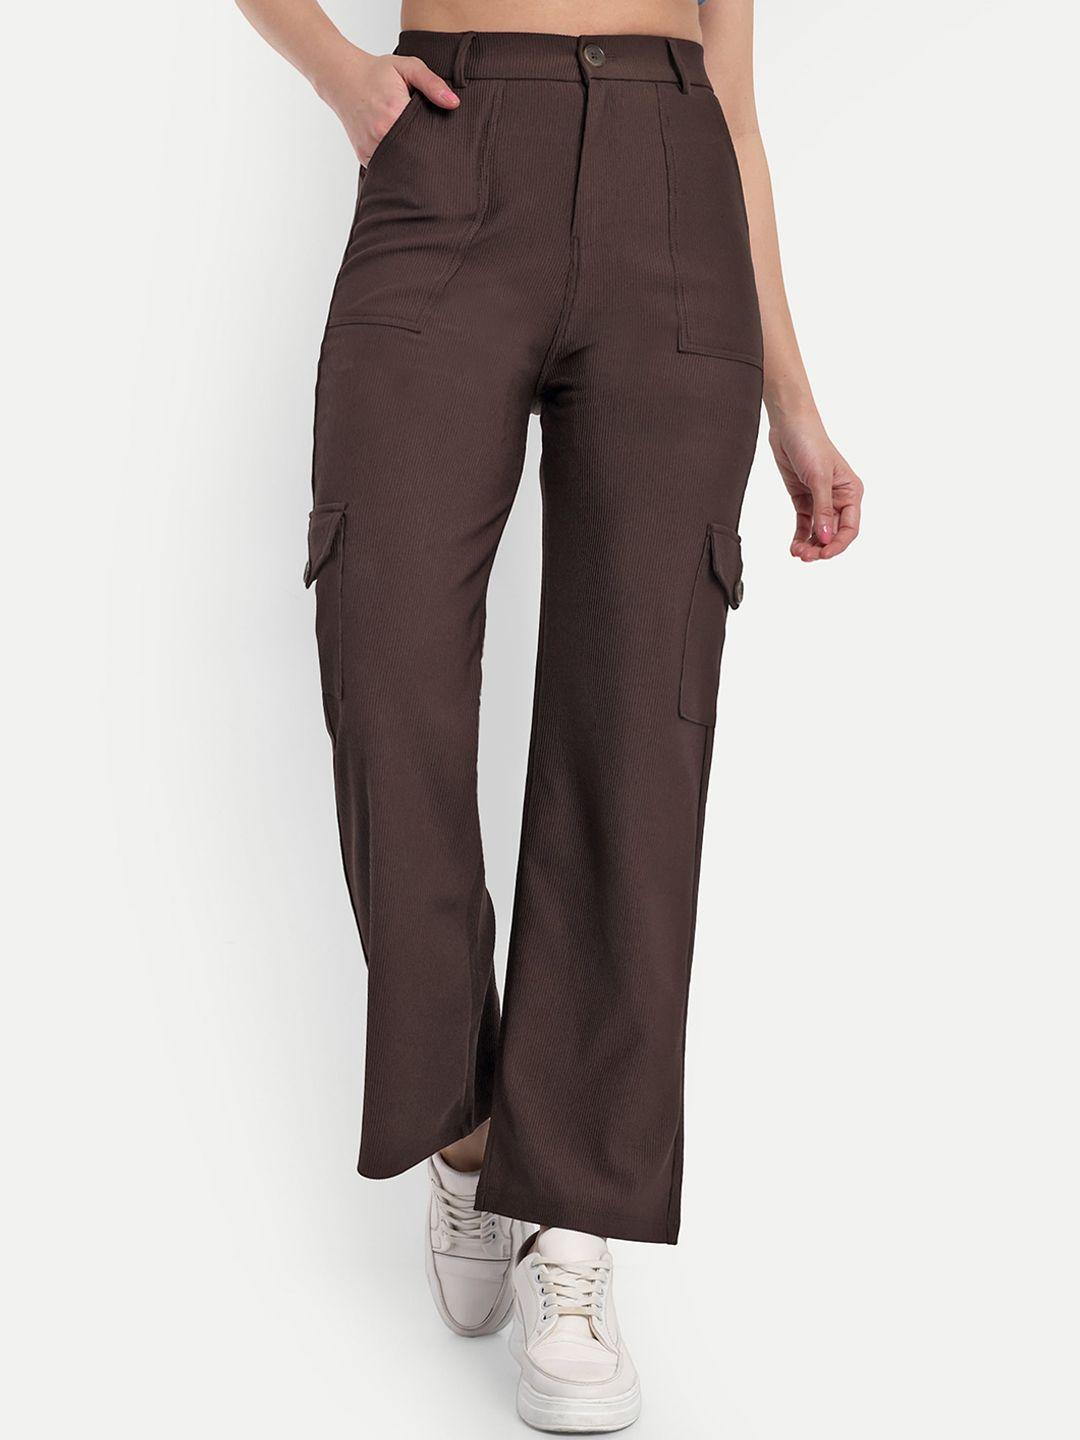 broadstar-women-smart-straight-fit-high-rise-easy-wash-corduroy-cargos-trousers